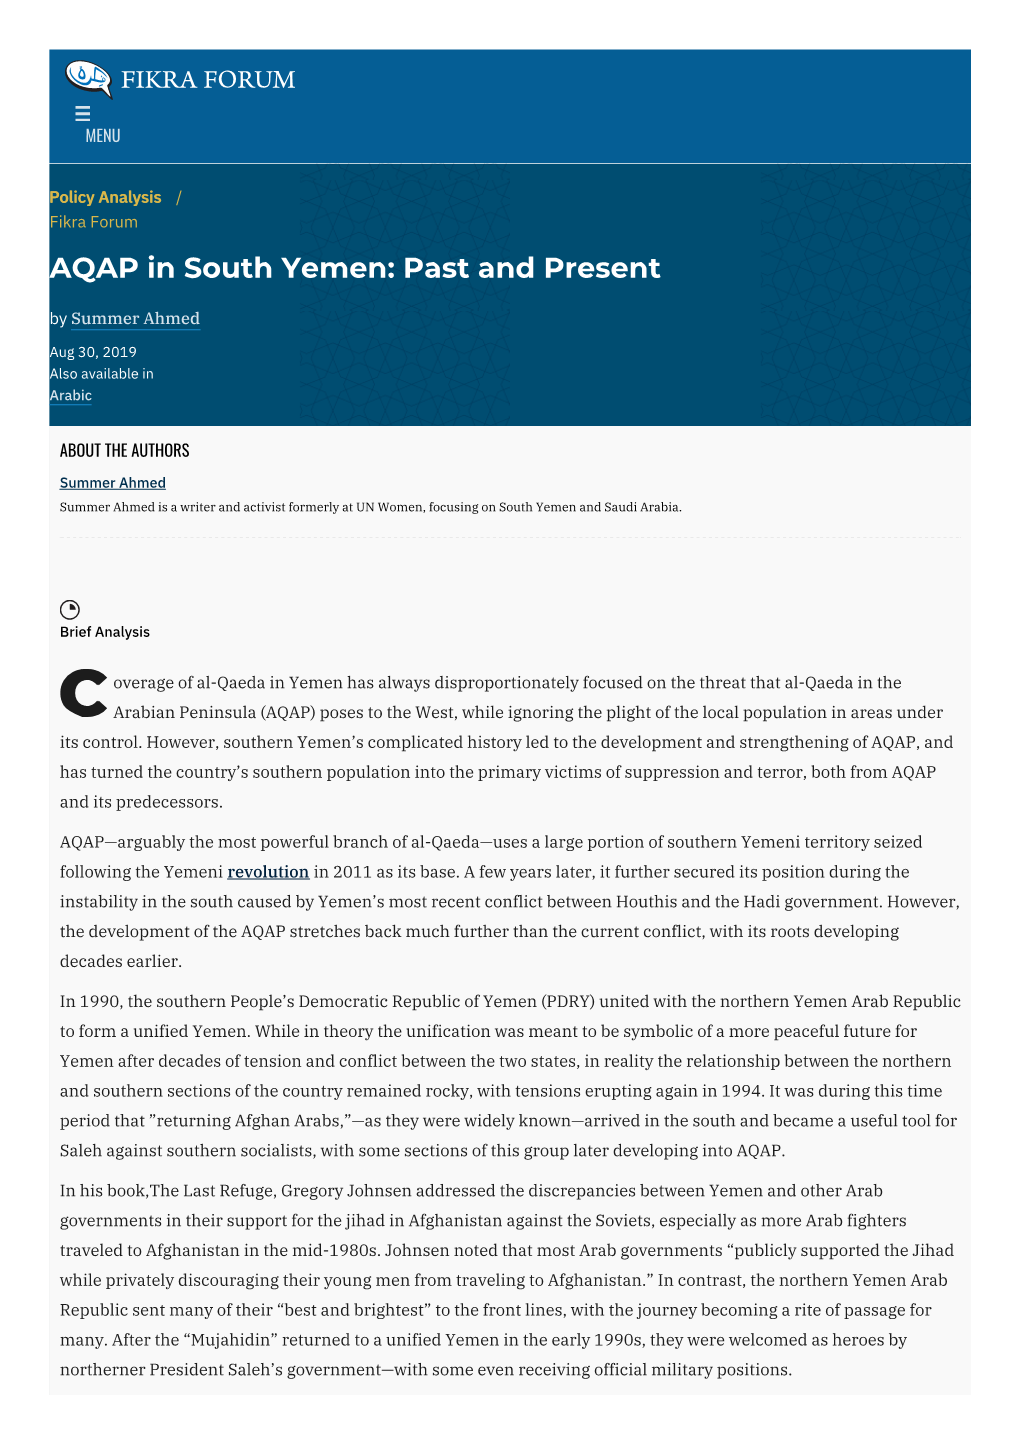 AQAP in South Yemen: Past and Present | the Washington Institute